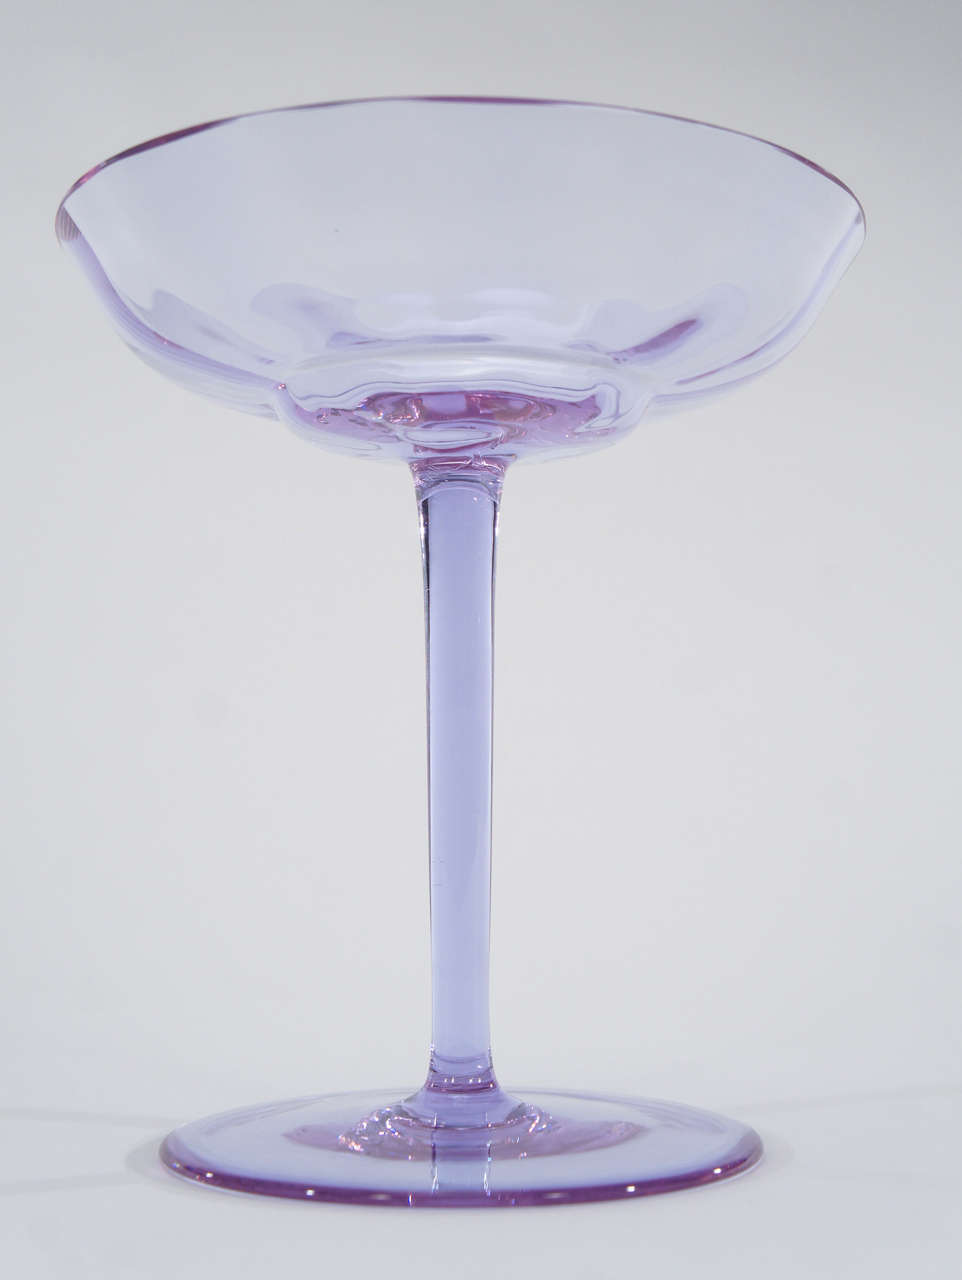 Pair of Signed Moser Alexandrite Footed Compotes and Vases In Excellent Condition For Sale In Great Barrington, MA